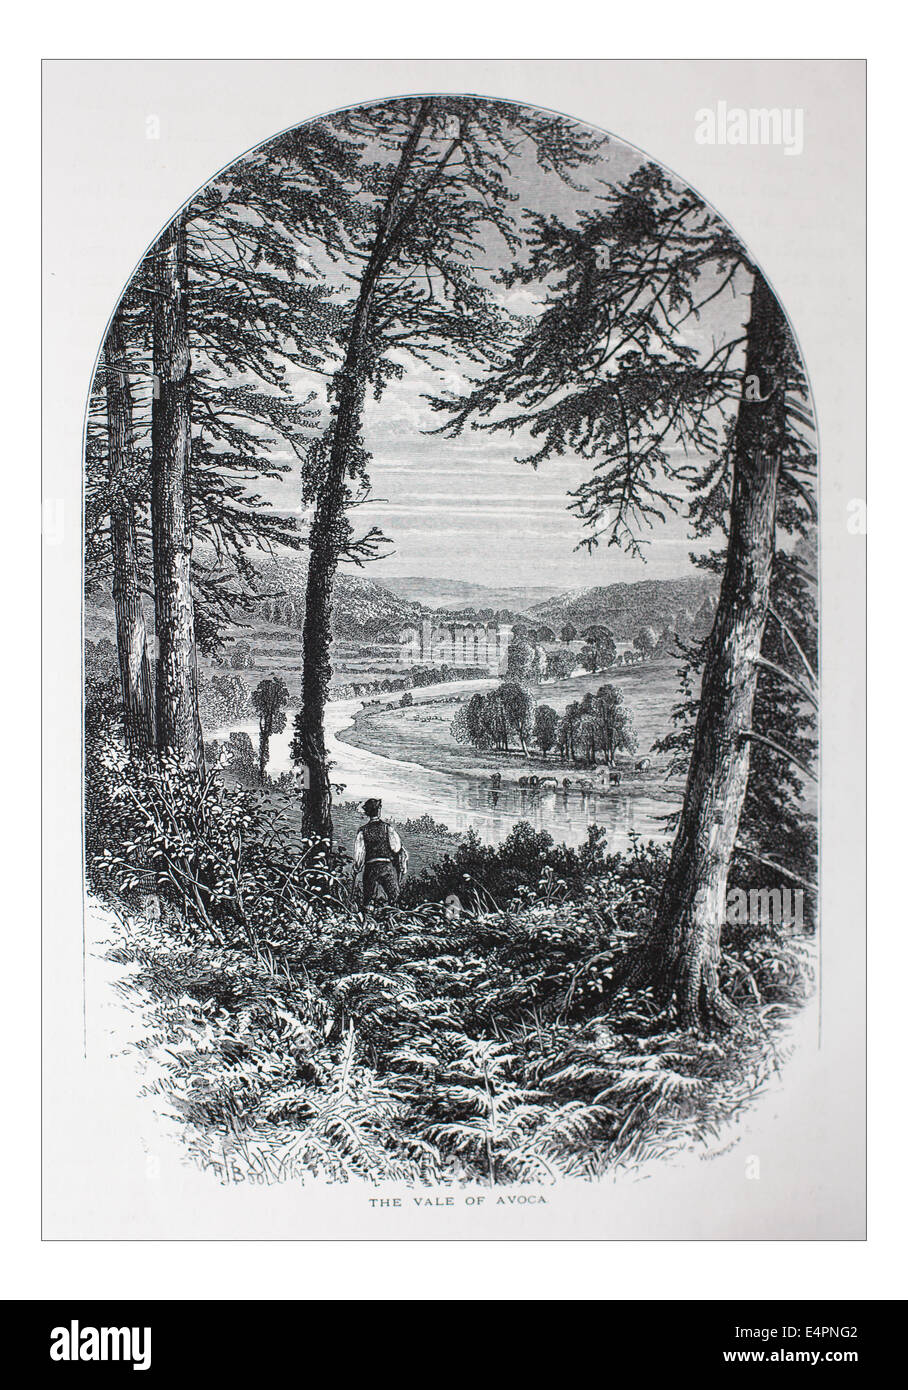 The Vale of Avoca, Ireland Illustration from 'The British isles - Cassell Petter & Galpin Part 8 Picturesque Europe. Picturesque Europe was an illustrated set of Magazines published by Cassell, Petter, Galpin & Co. of London, Paris and New York in 1877. The publications depicted tourist haunts in Europe, with text descriptions and steel and wood engravings by eminent artists of the time, such as Harry Fenn, William H J Boot, Thomas C. L. Rowbotham, Henry T. Green , Myles B. Foster, John Mogford , David H. McKewan, William L. Leitch, Edmund M. Wimperis and Joseph B. Smith. Stock Photo